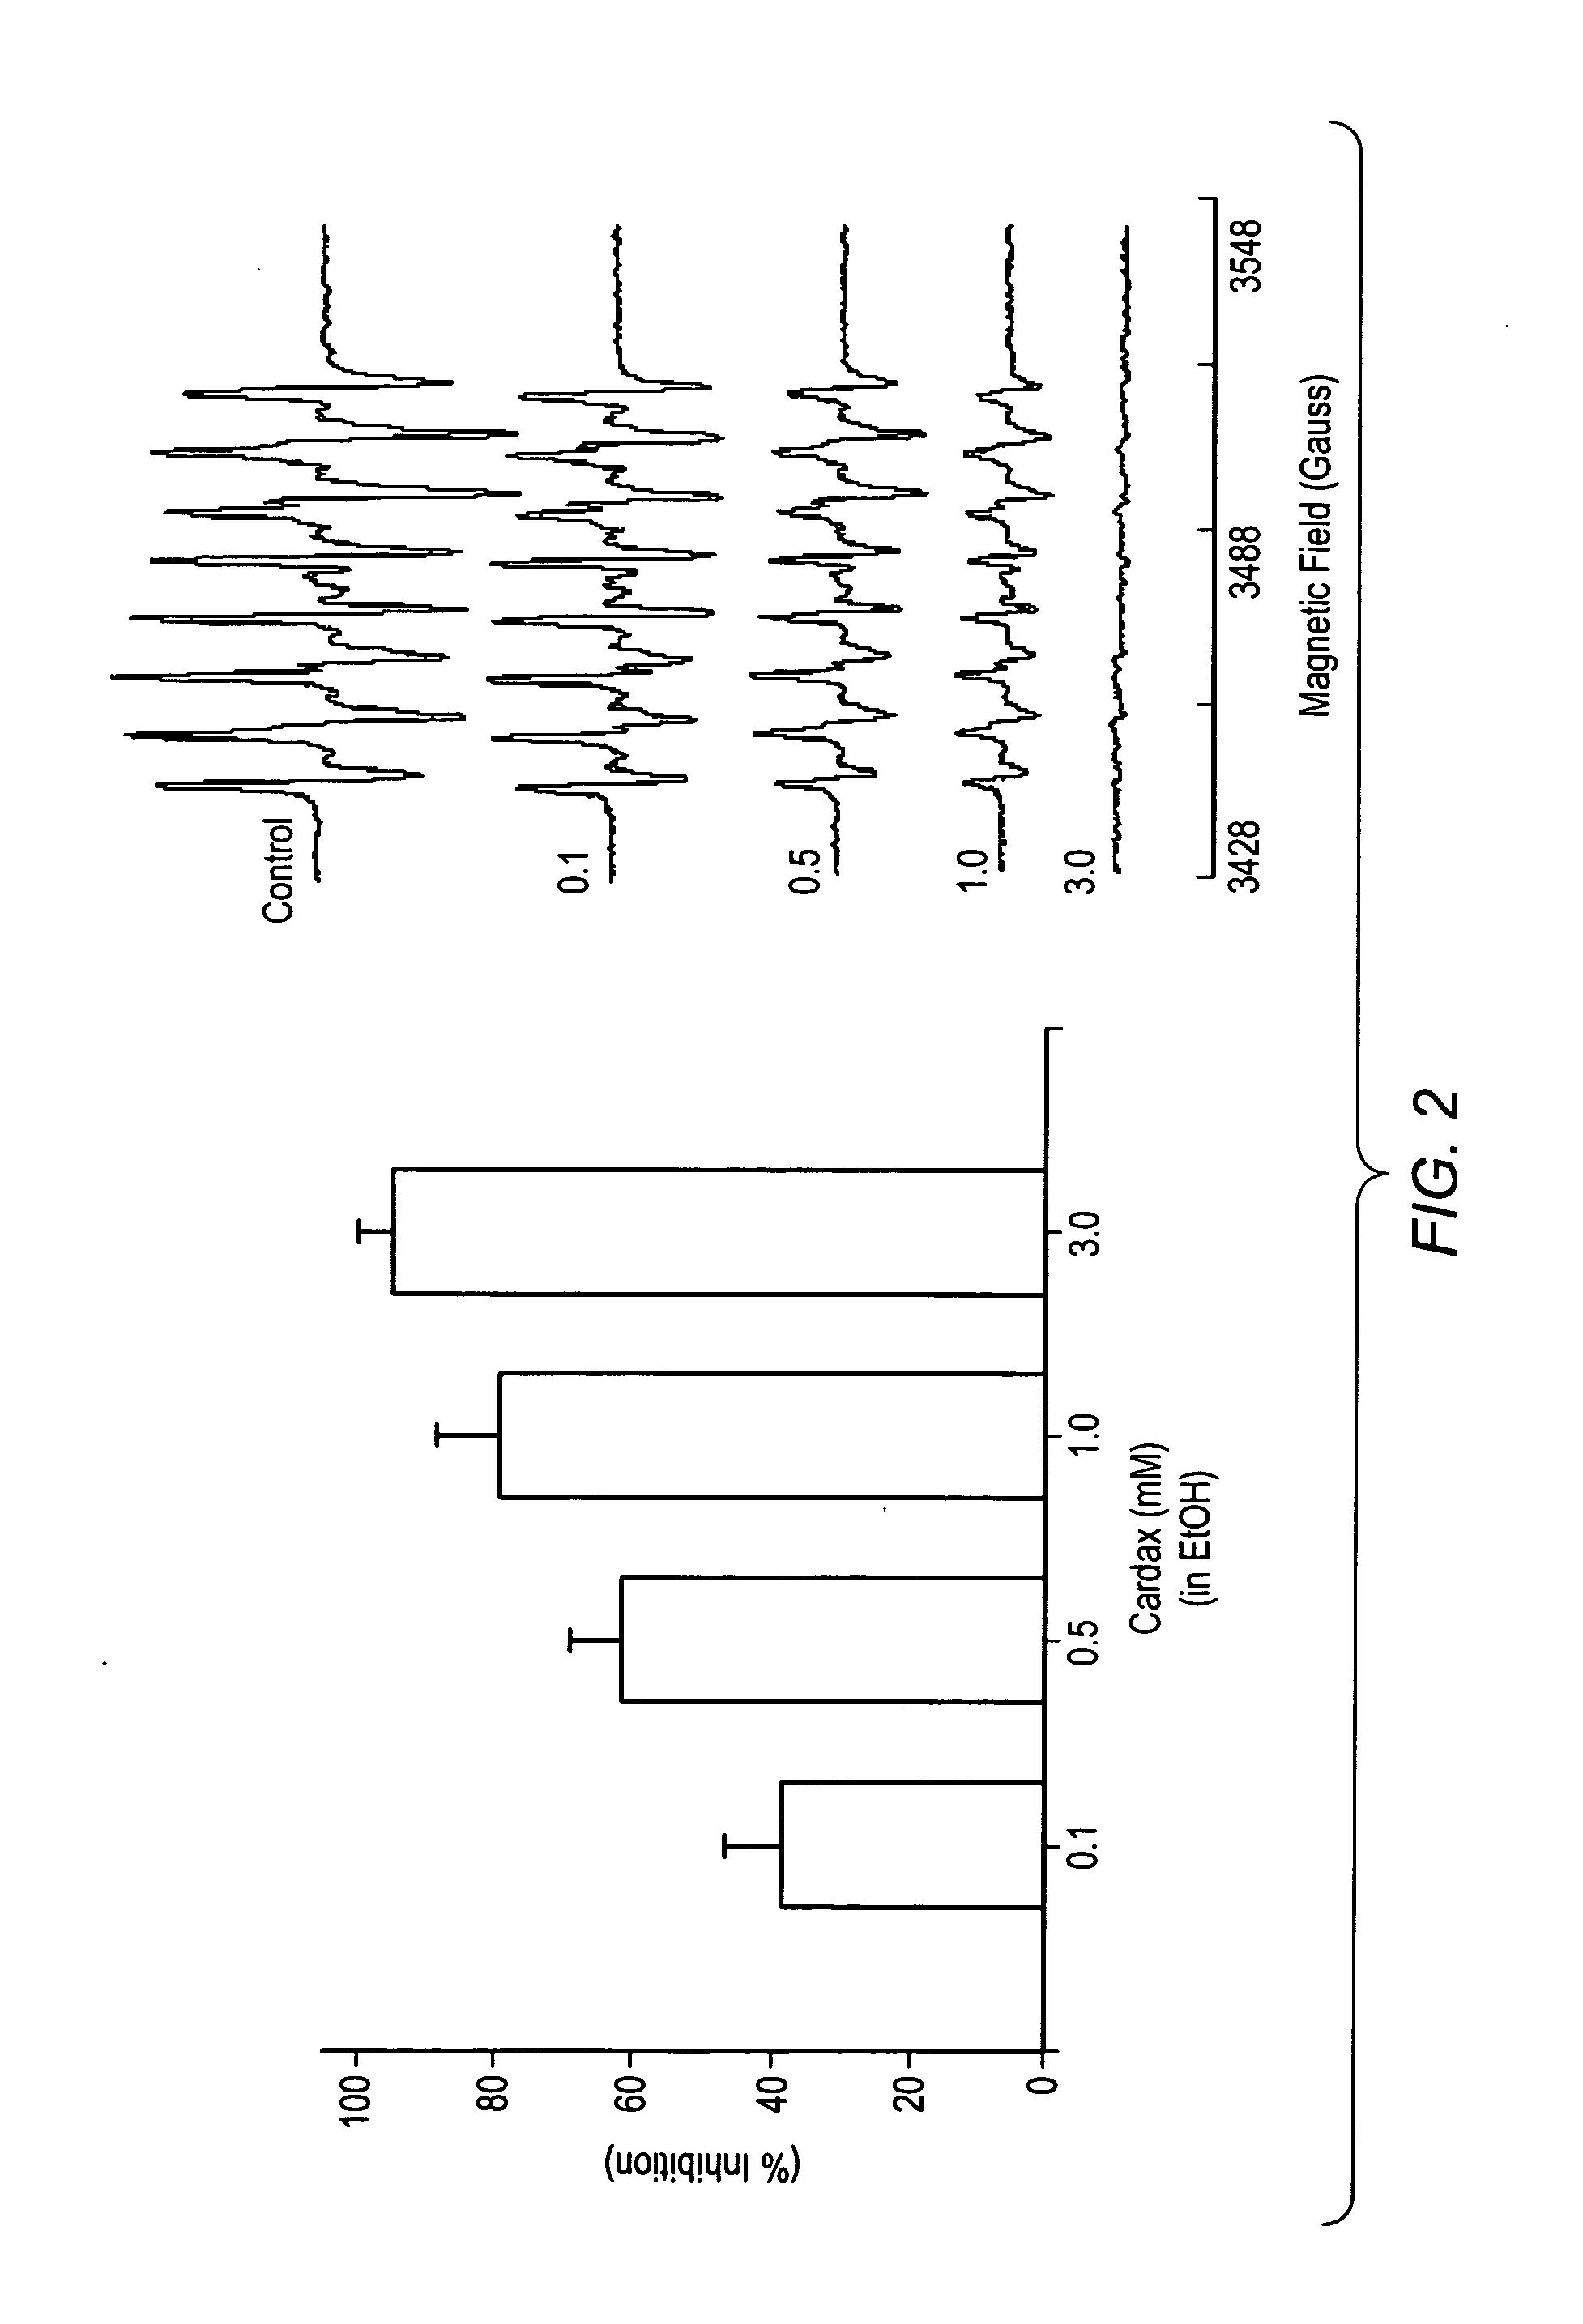 Carotenoid ether analogs or derivatives for controlling connexin 43 expression